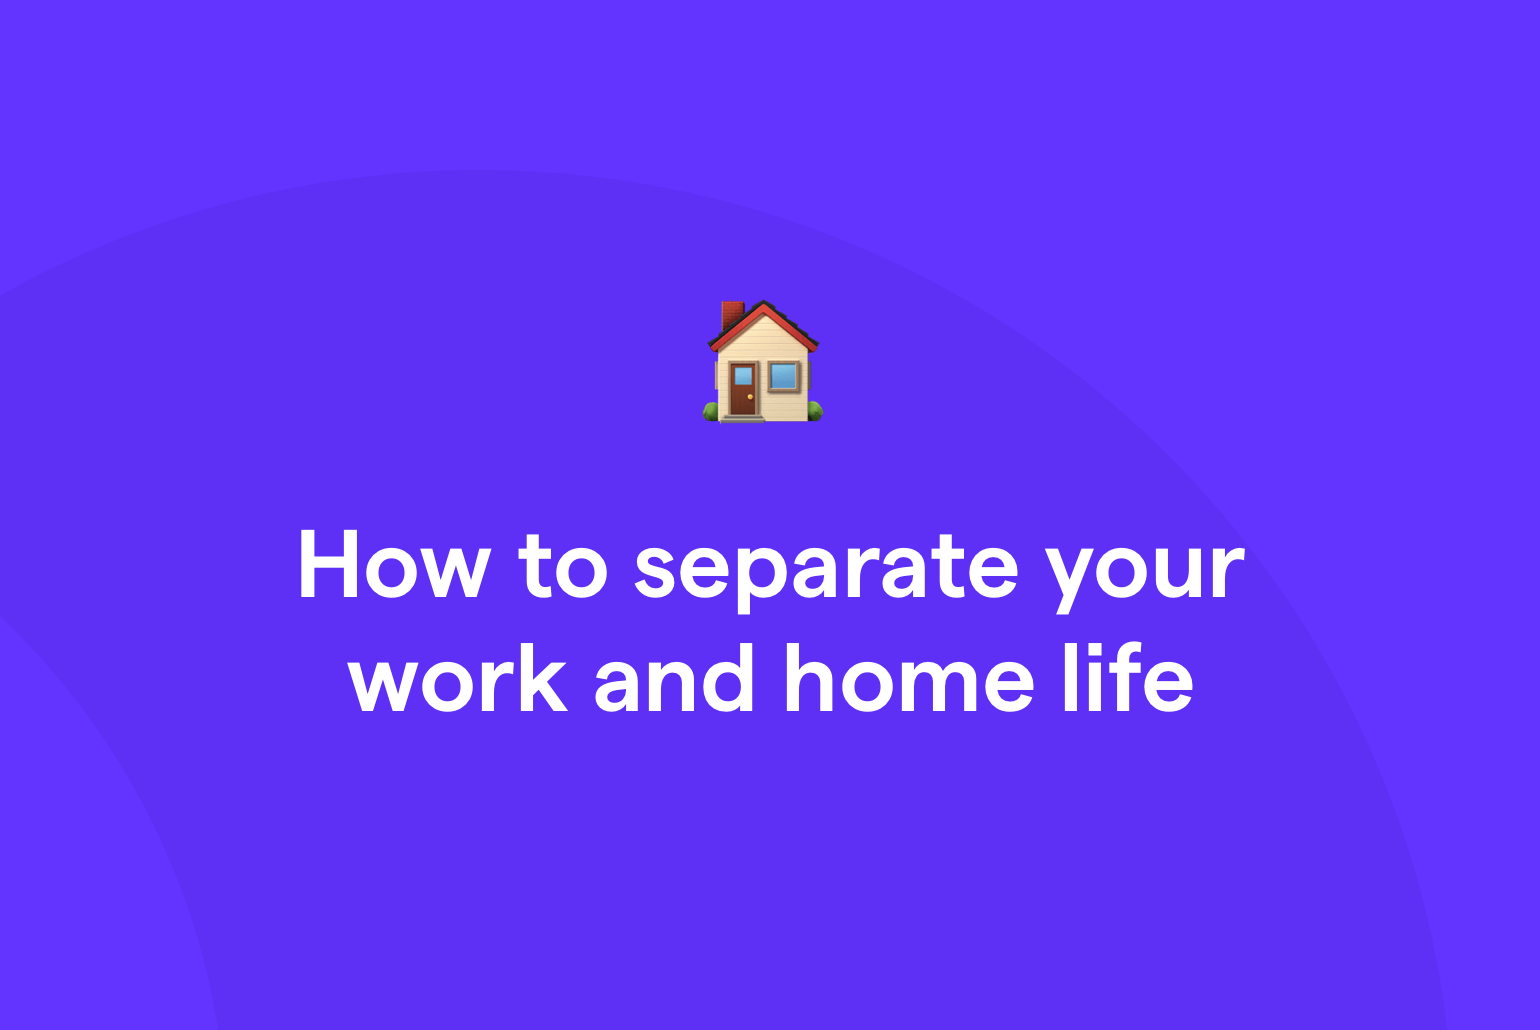 How to separate work and home